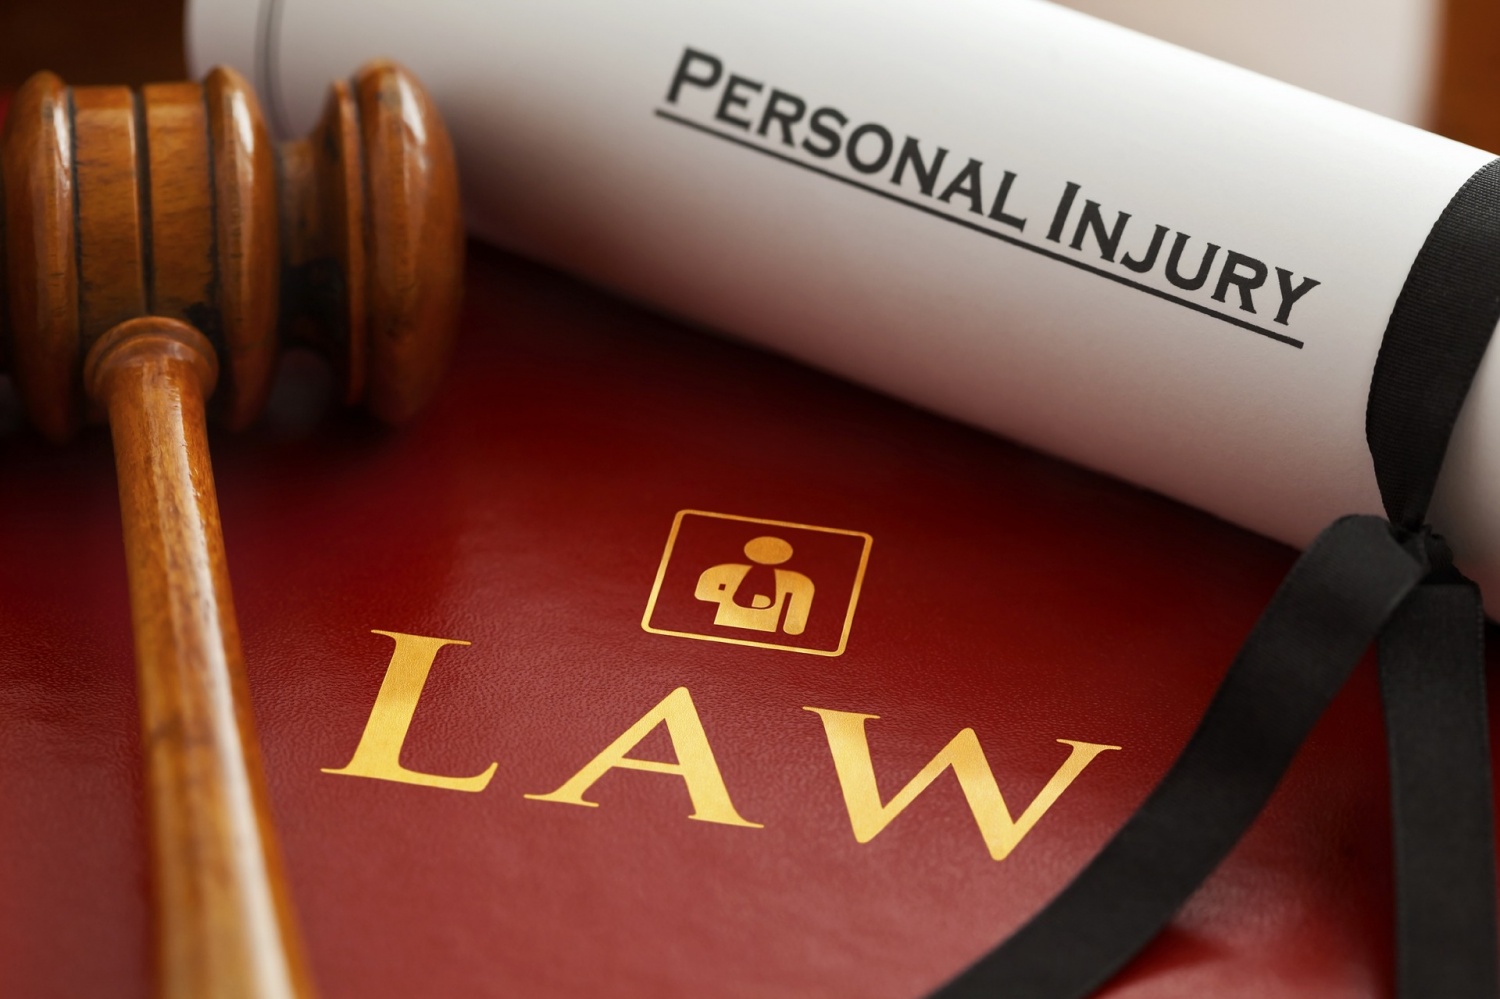 Just How Big is the Personal Injury Industry?